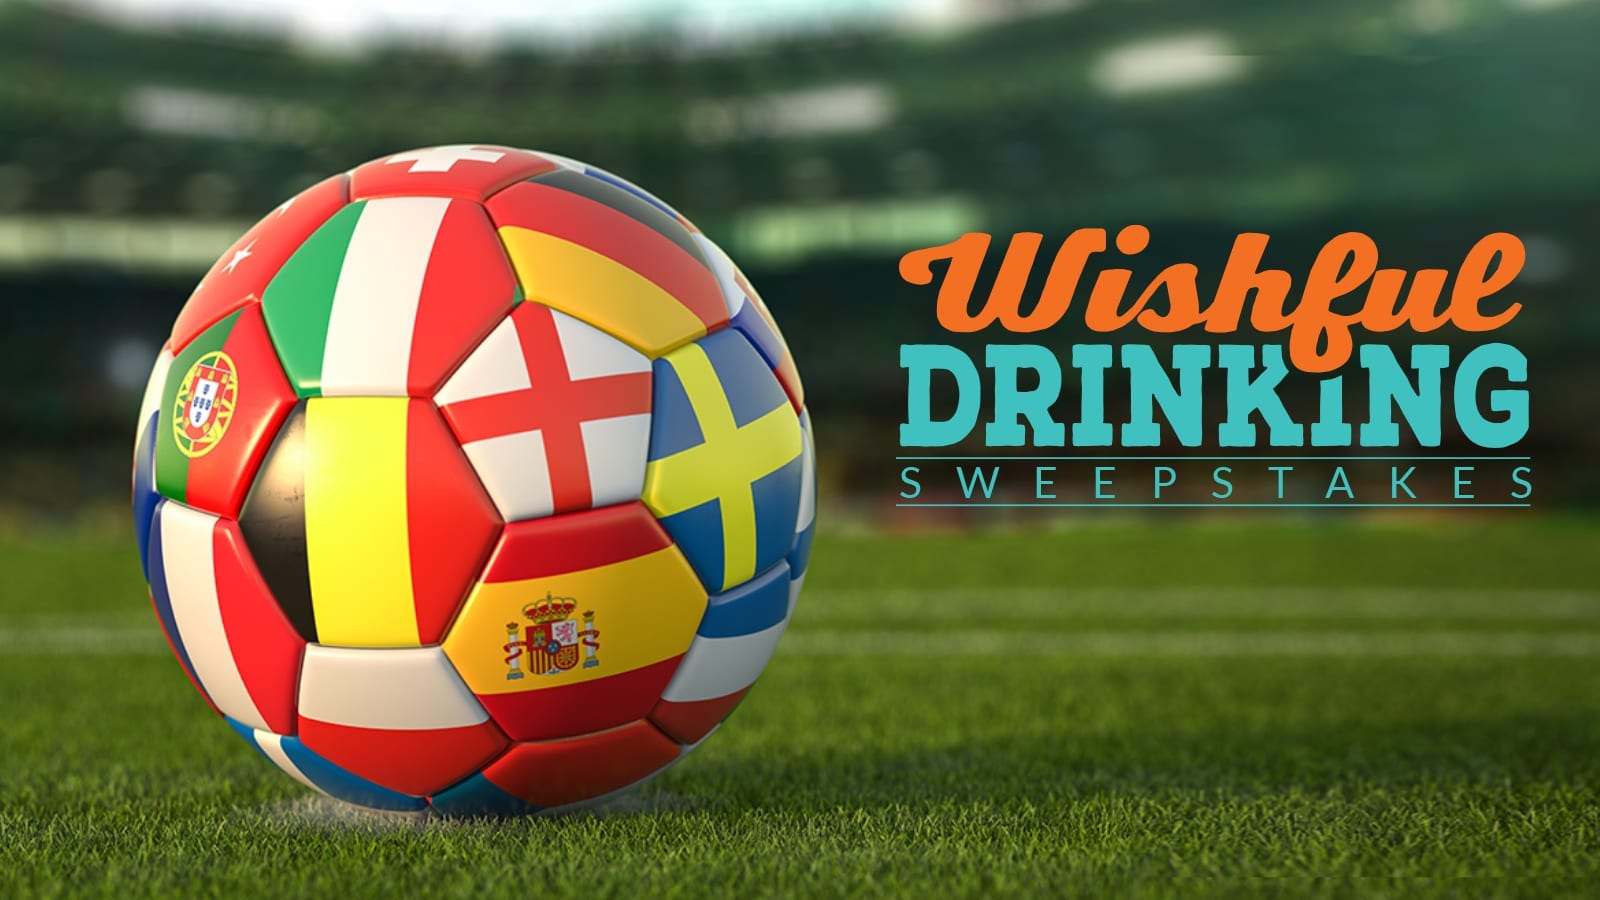 Have you seen the Euro 2020 Wishful Sweepstakes?